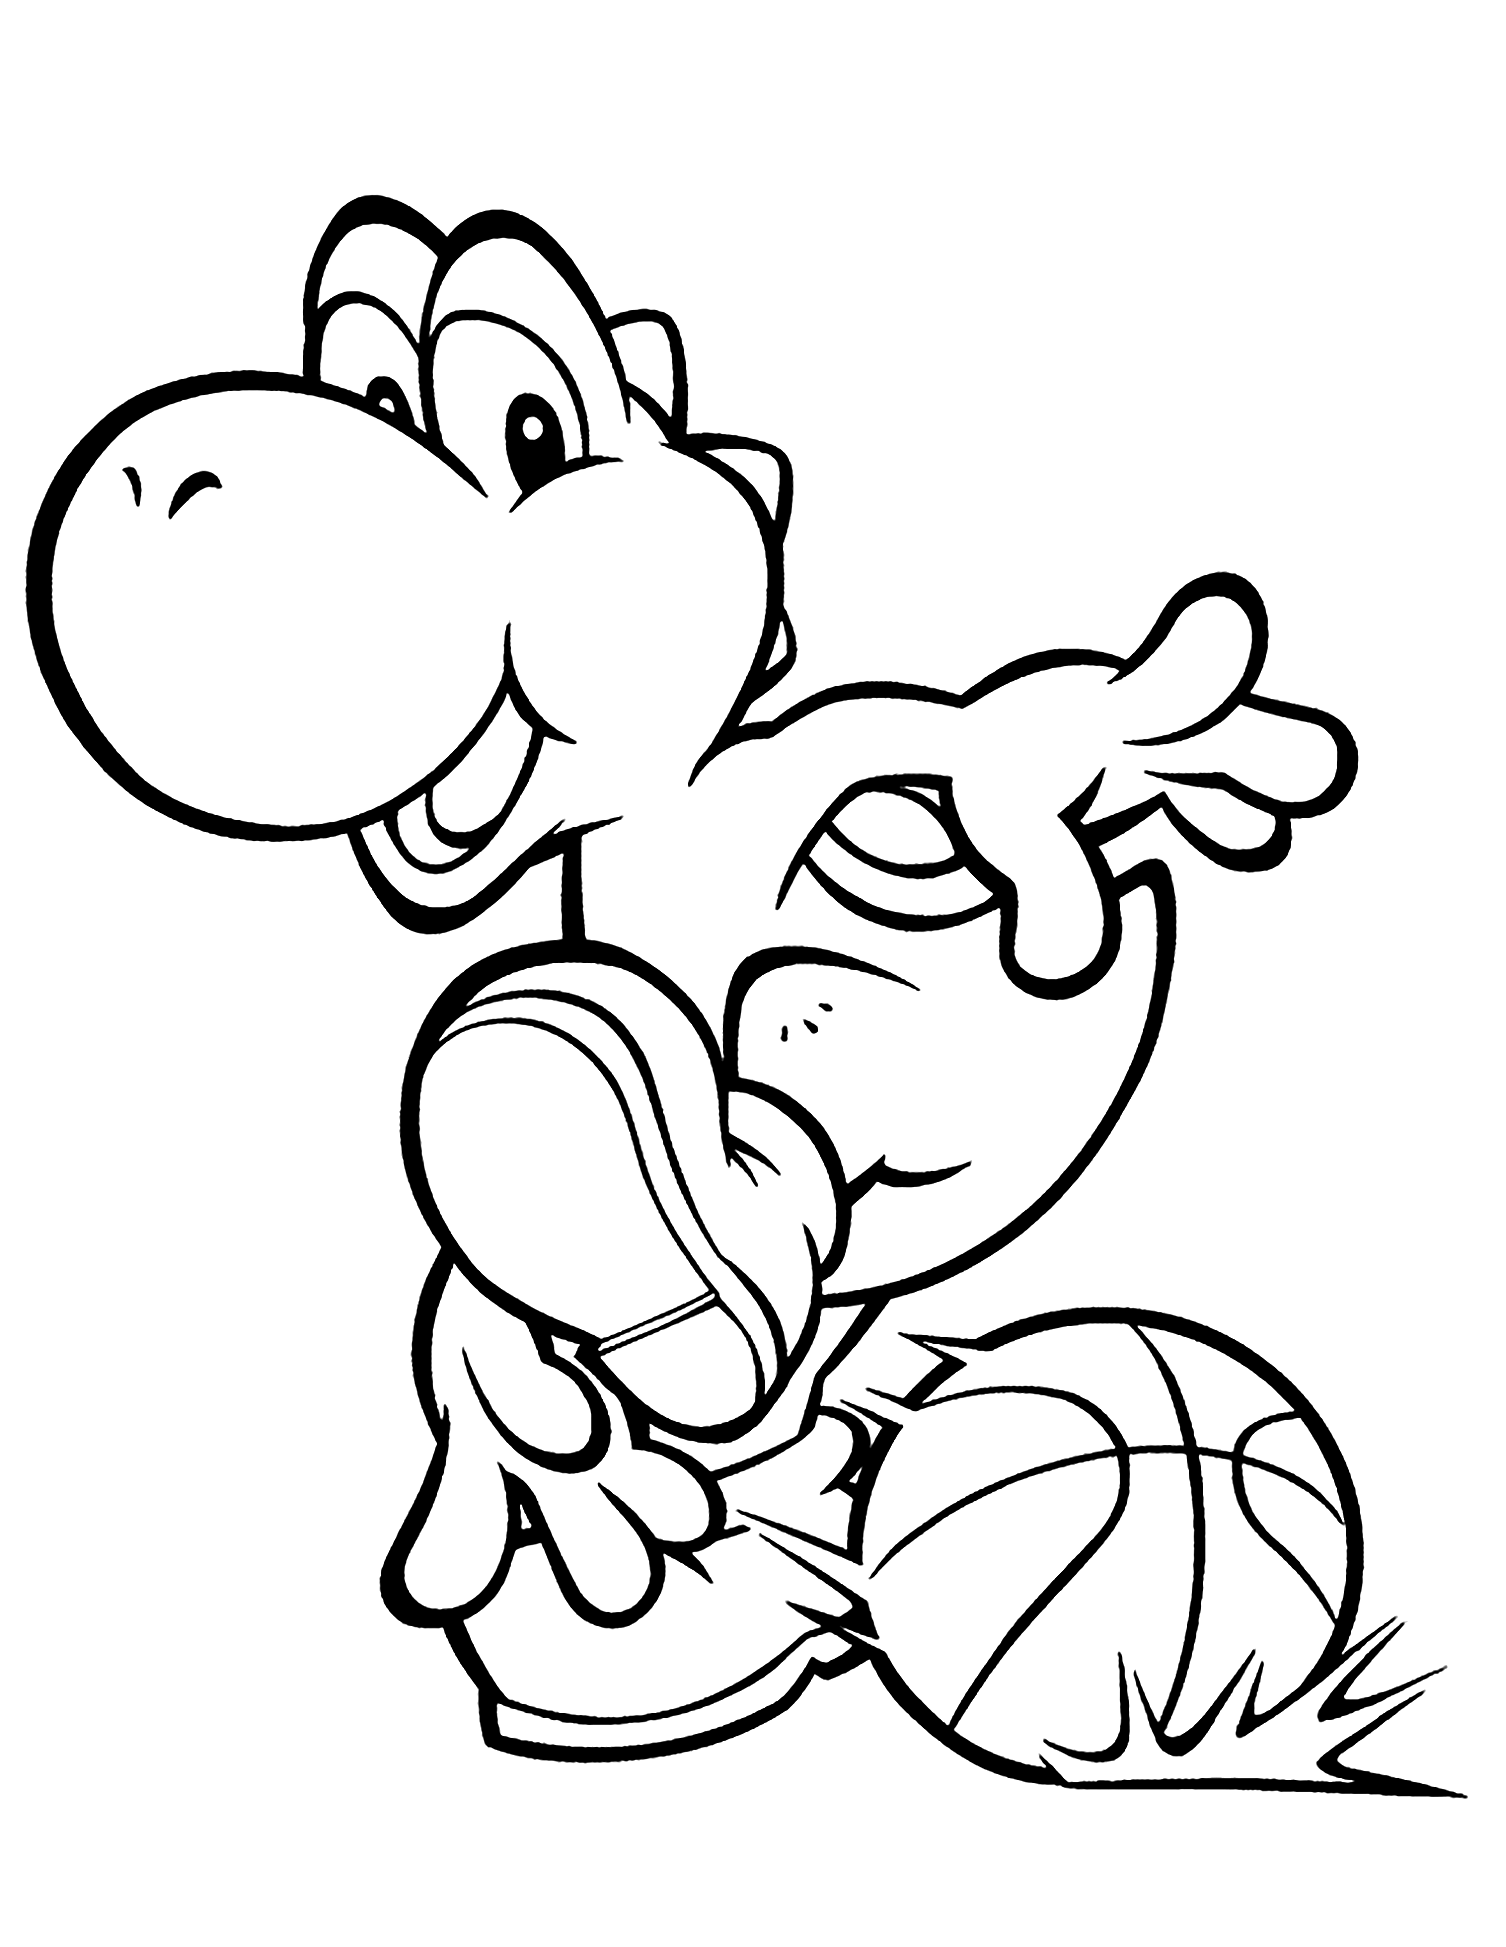 Easy basketball coloring pages for kids